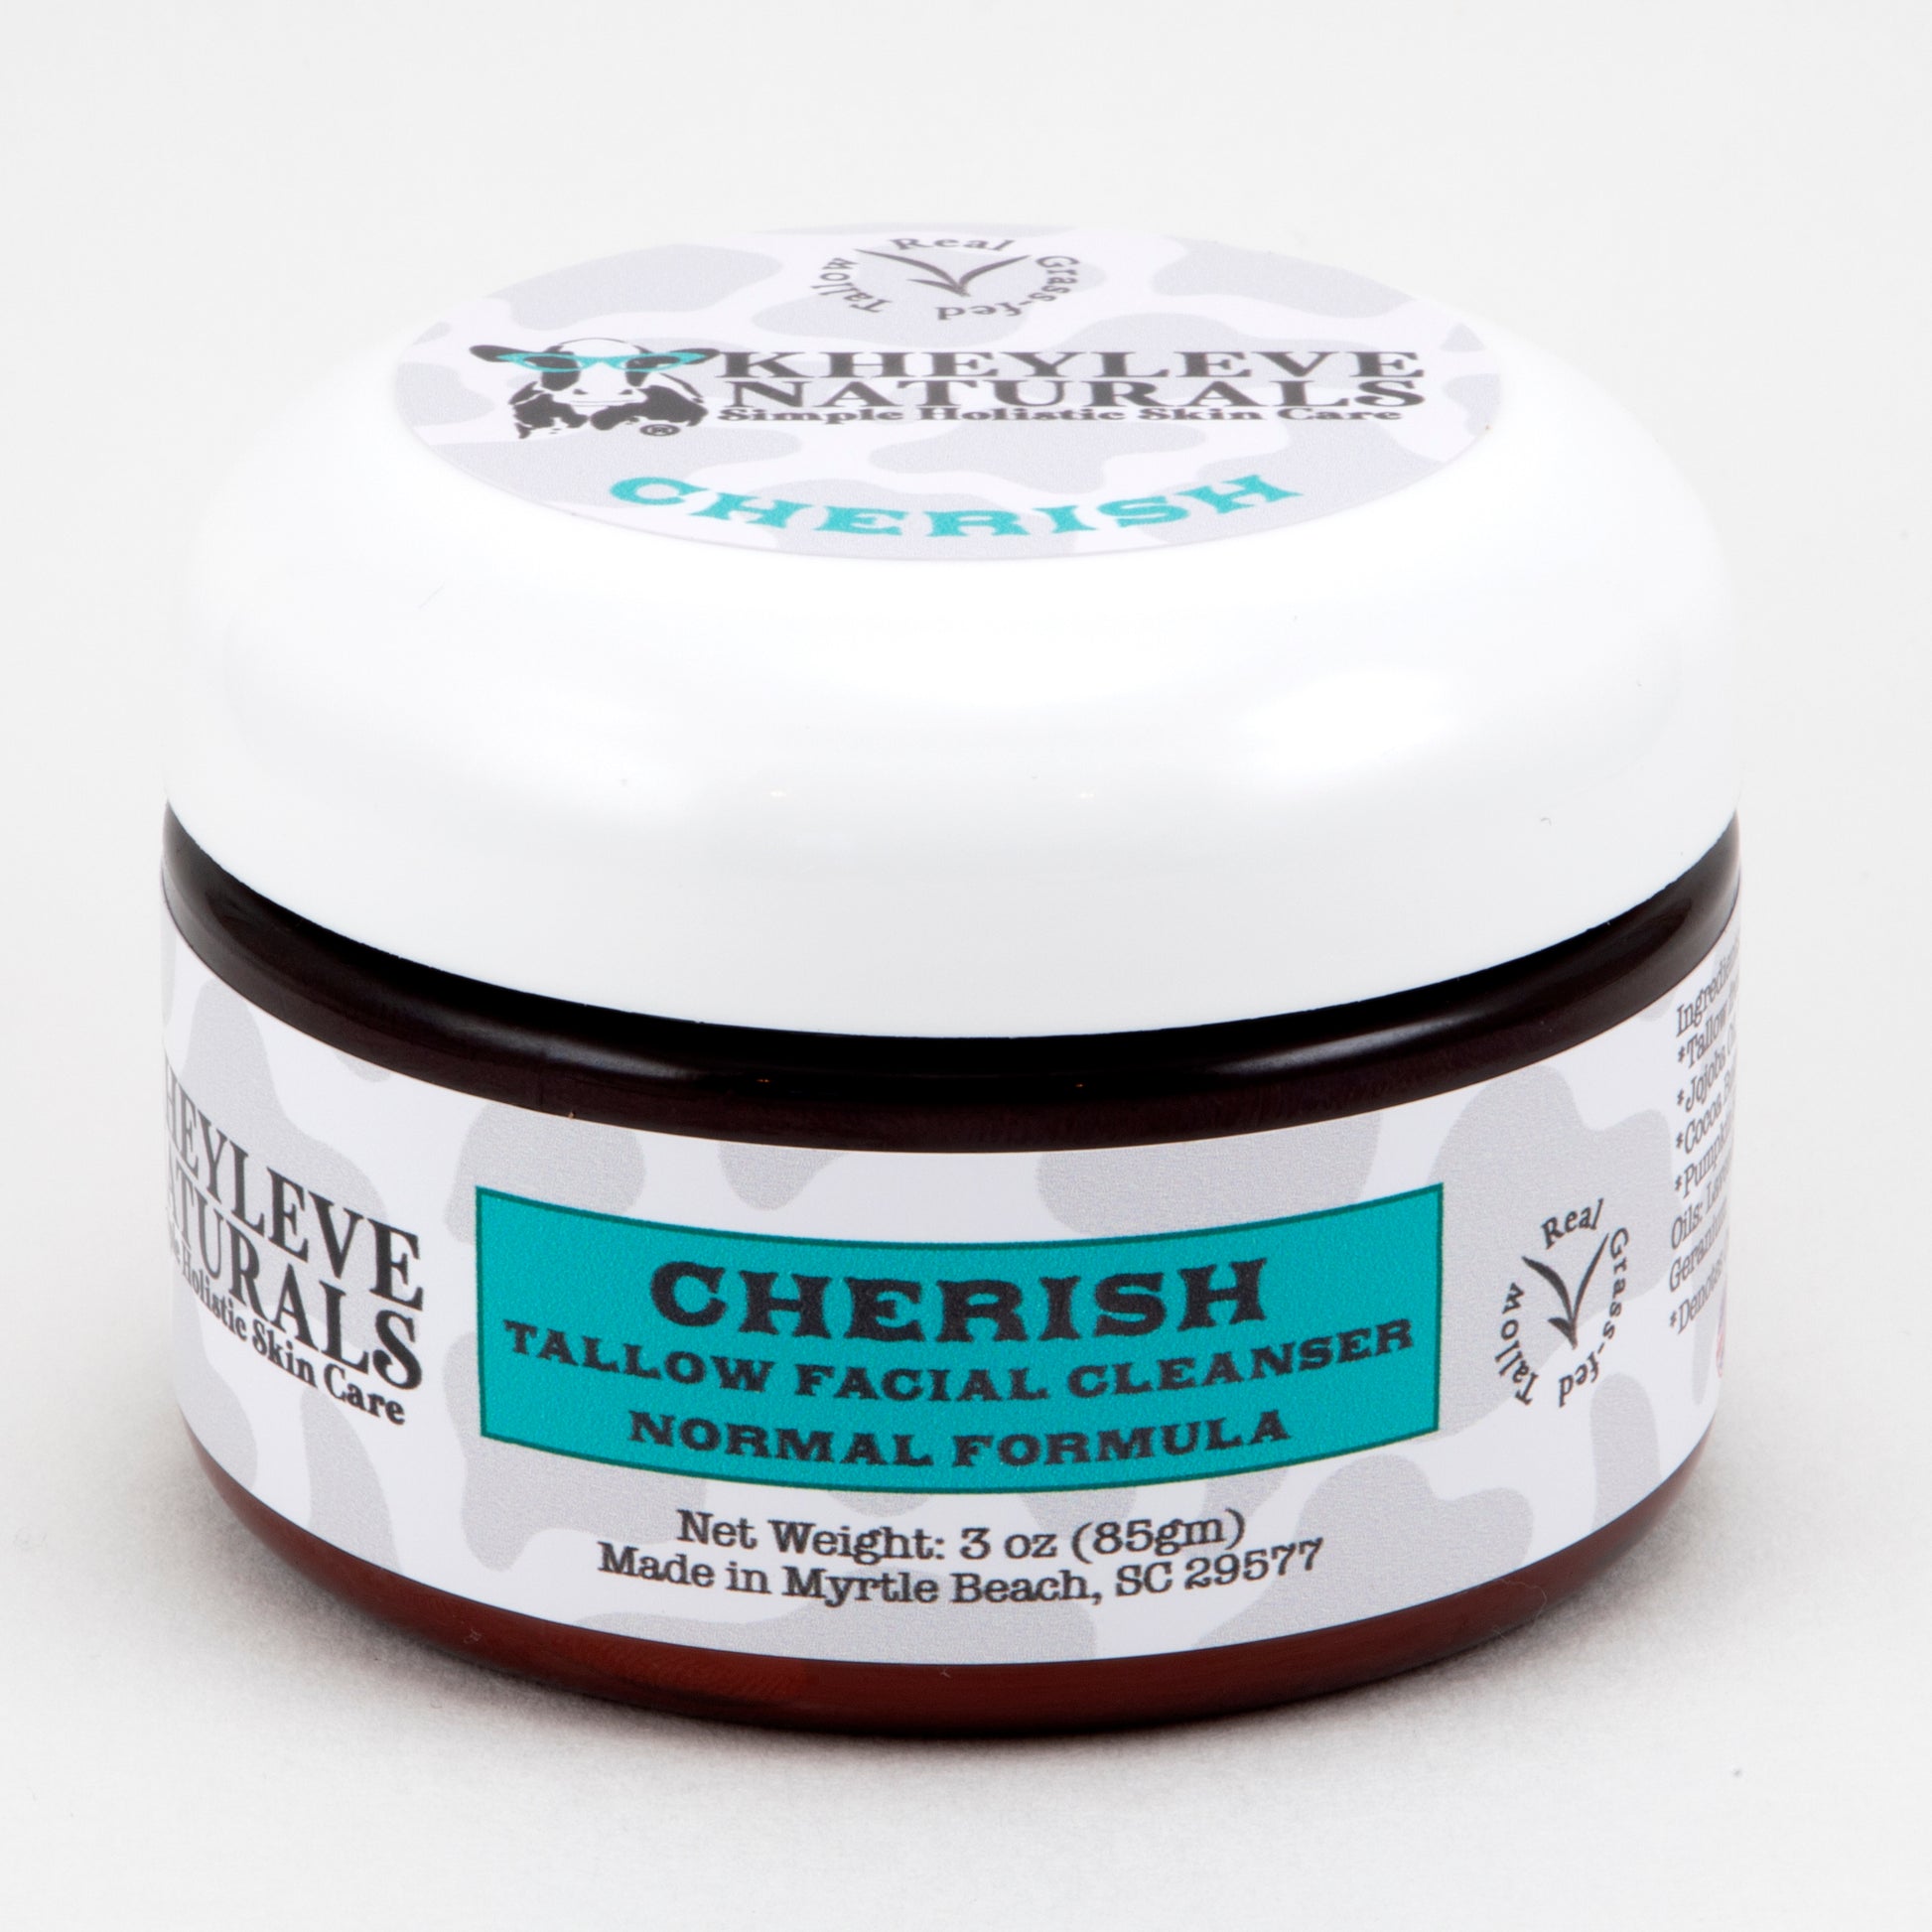 Cherish Cleanser is an OCM (oil cleansing method) cleanser tallow based and gentle to use on all skin types.